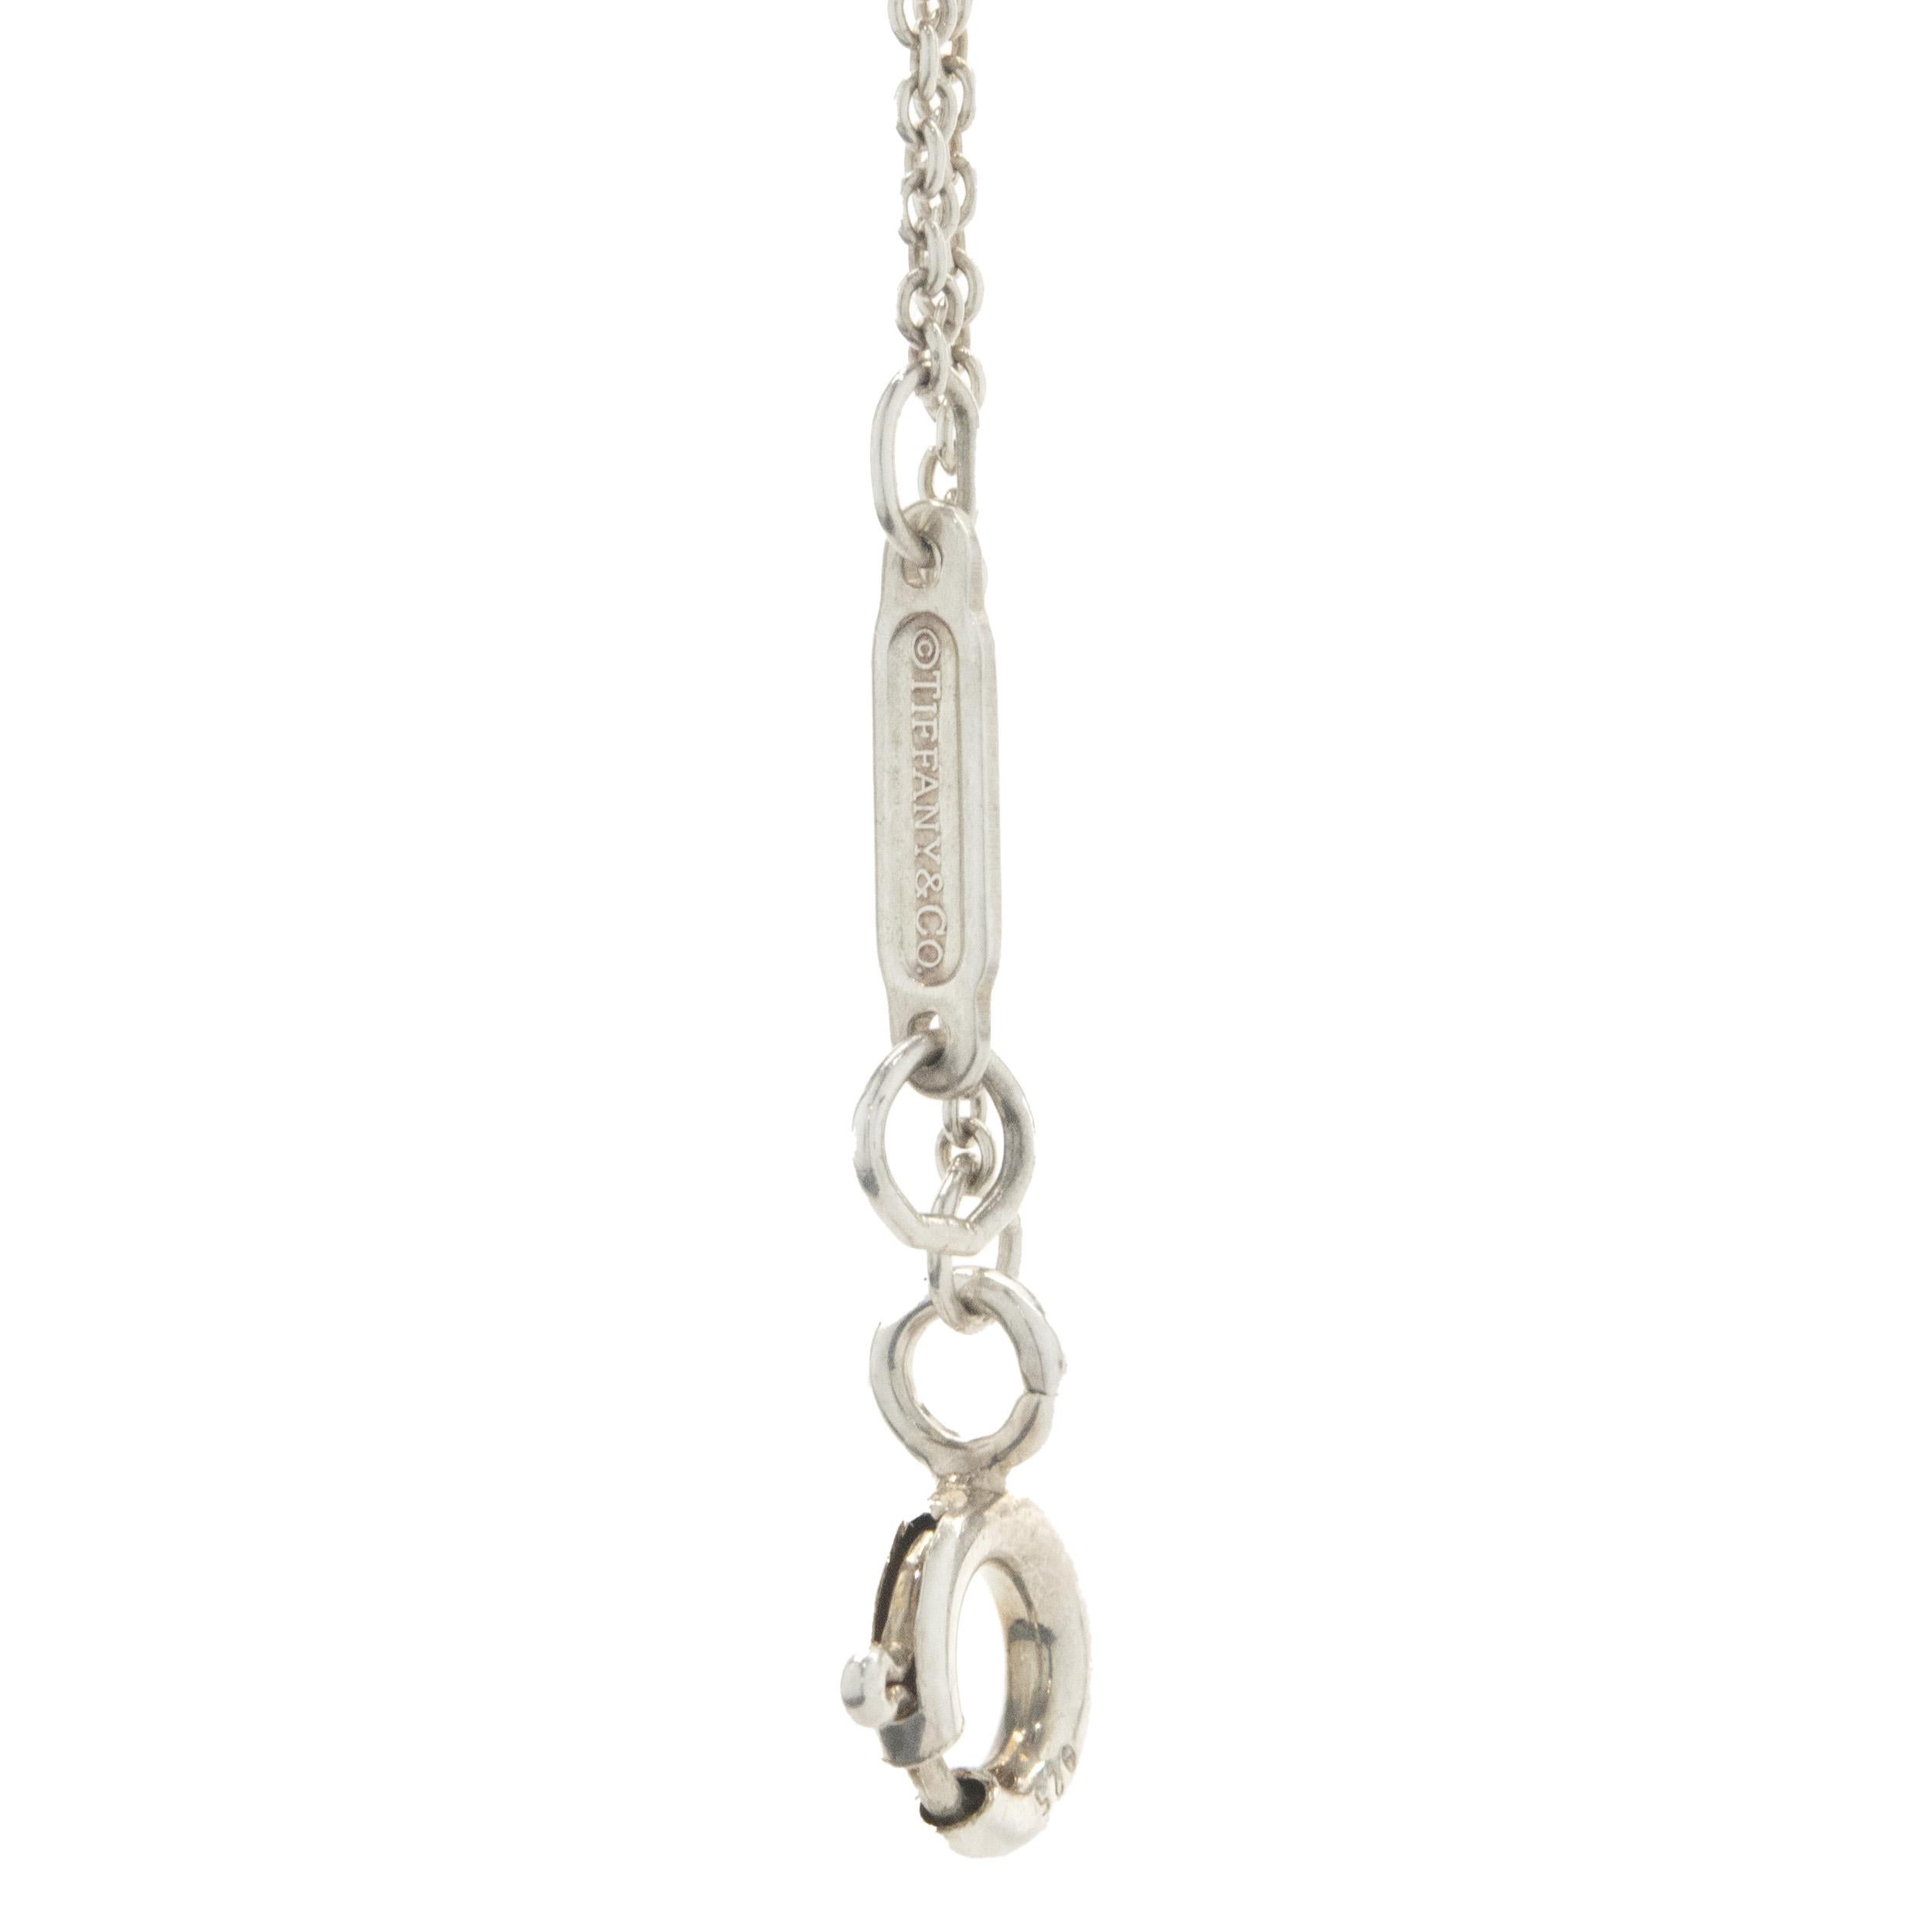 Designer: Tiffany & Co. 
Material: sterling silver
Dimensions: necklace measures 16-inches in length
Weight: 1.10 grams